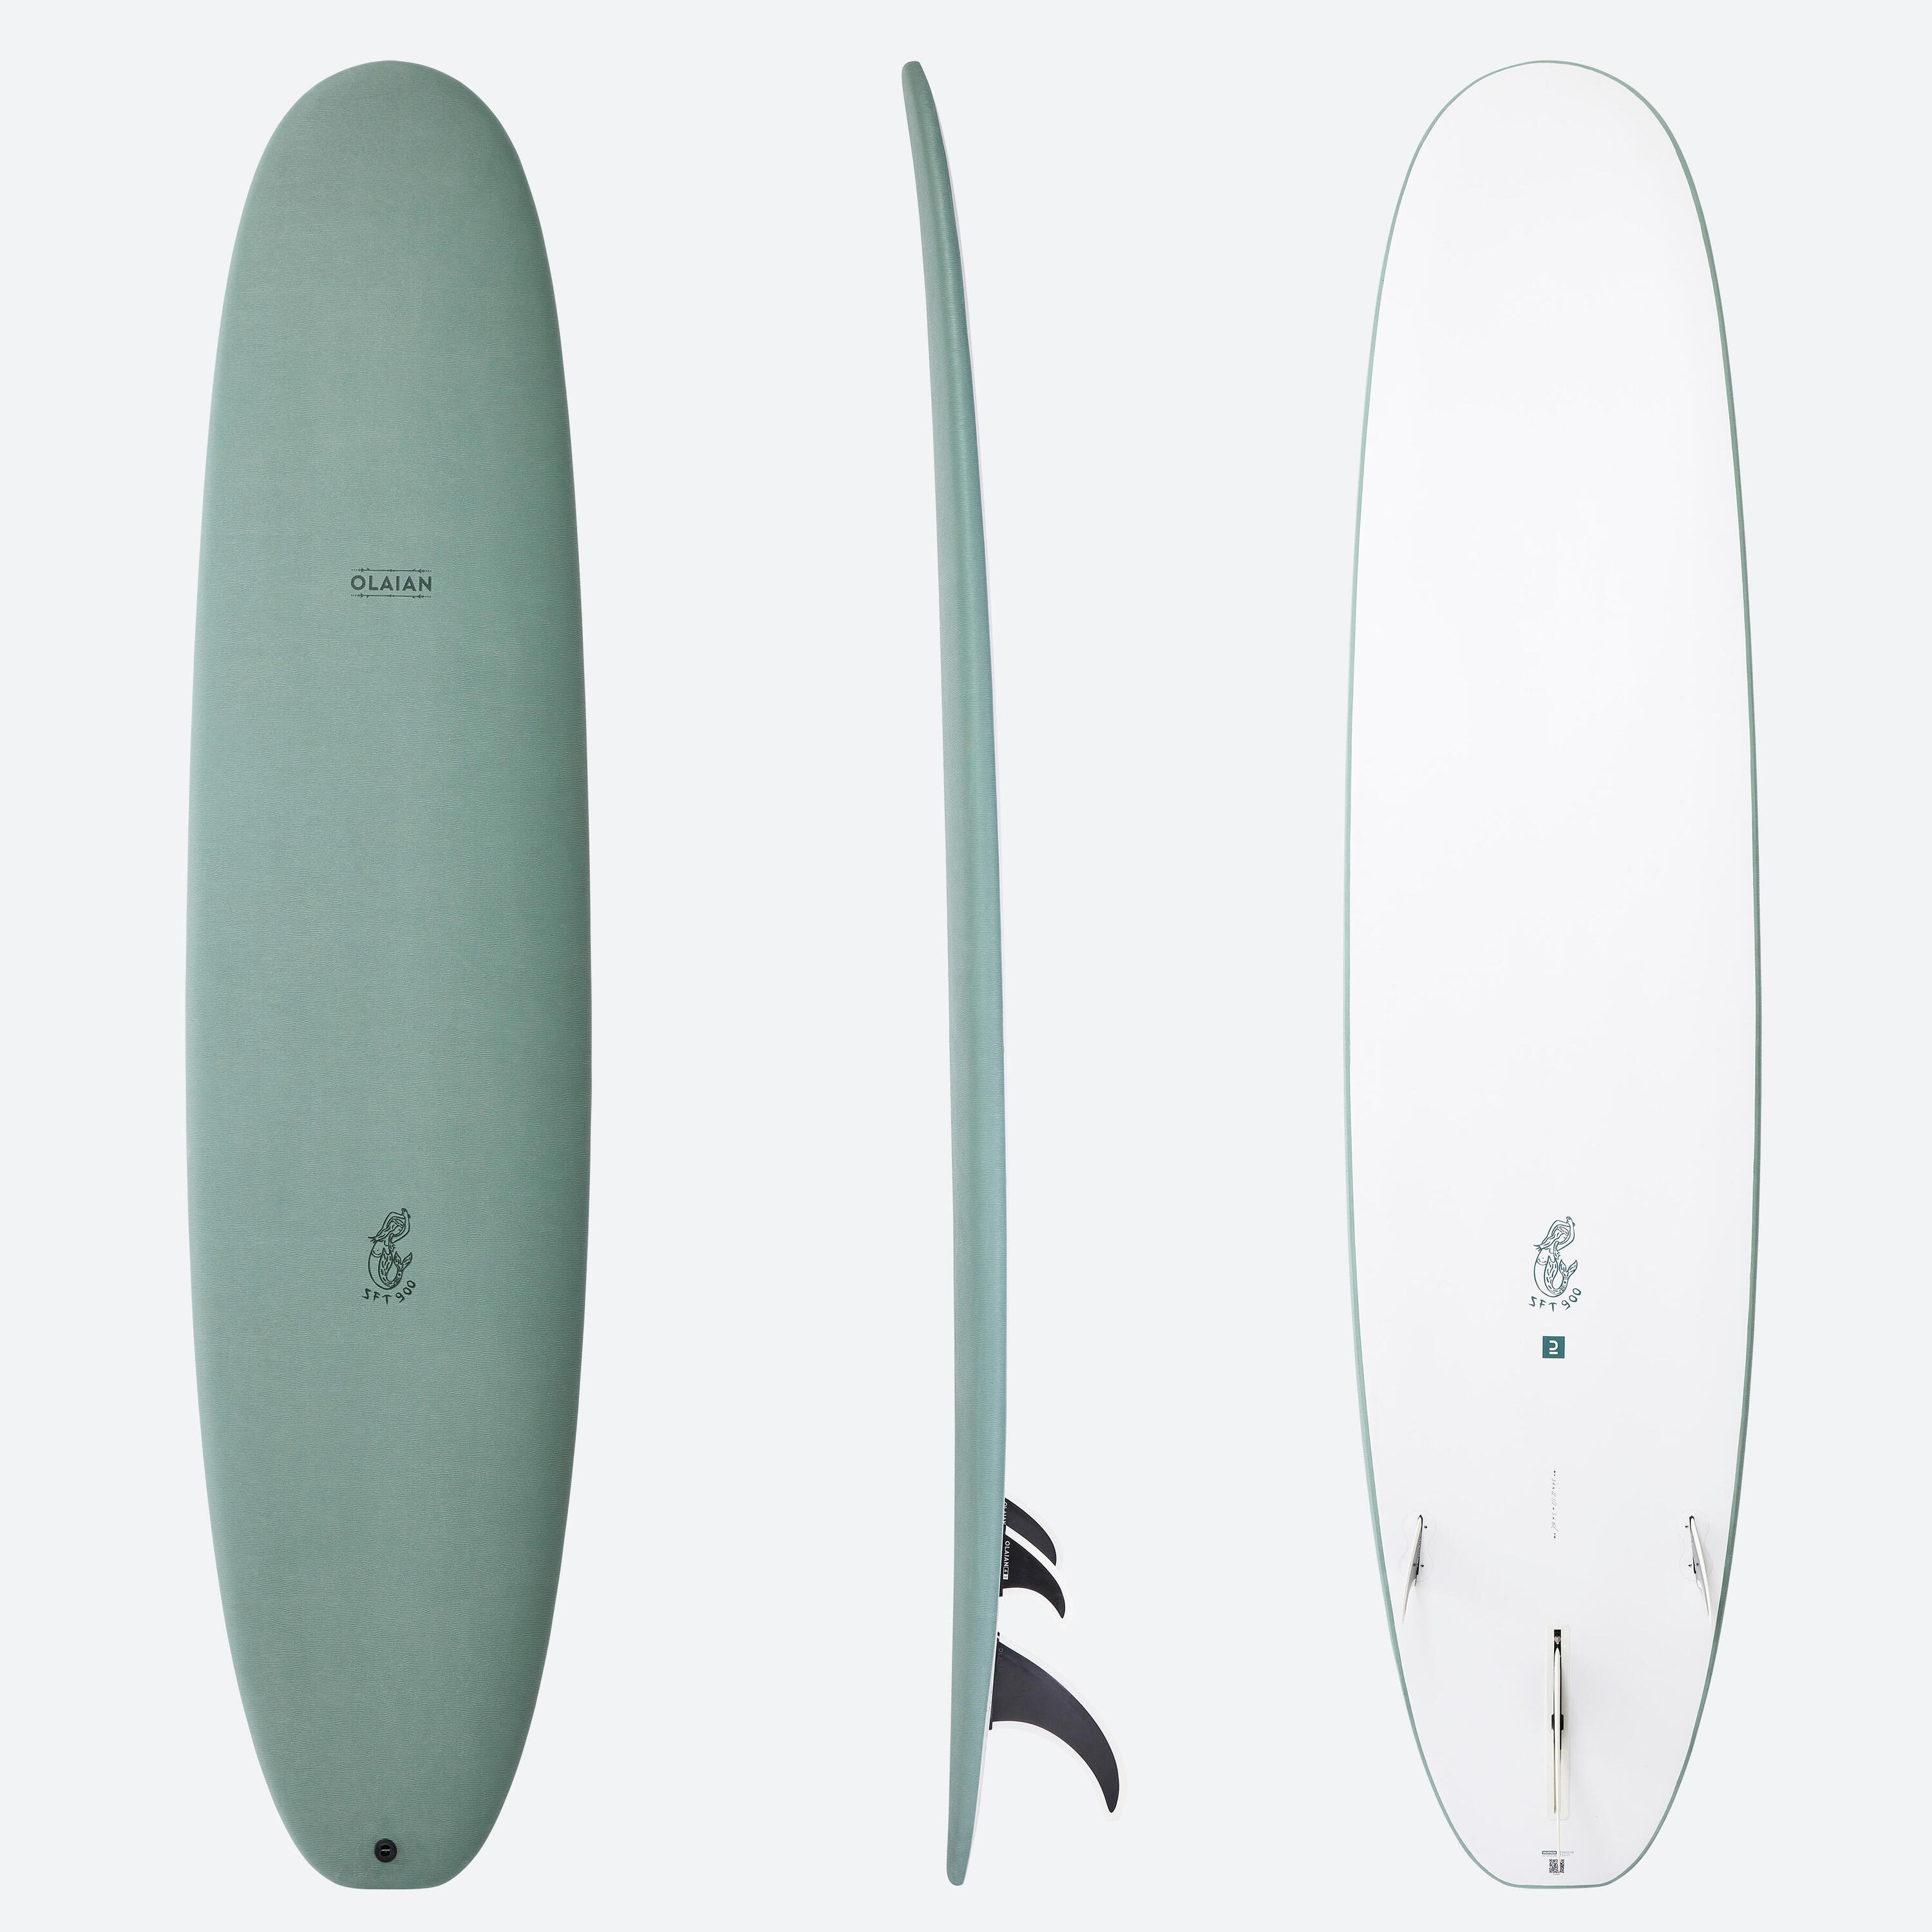 OLAIAN SURFBOARD 900 EPOXY SOFT 8'4 with 3 fins.